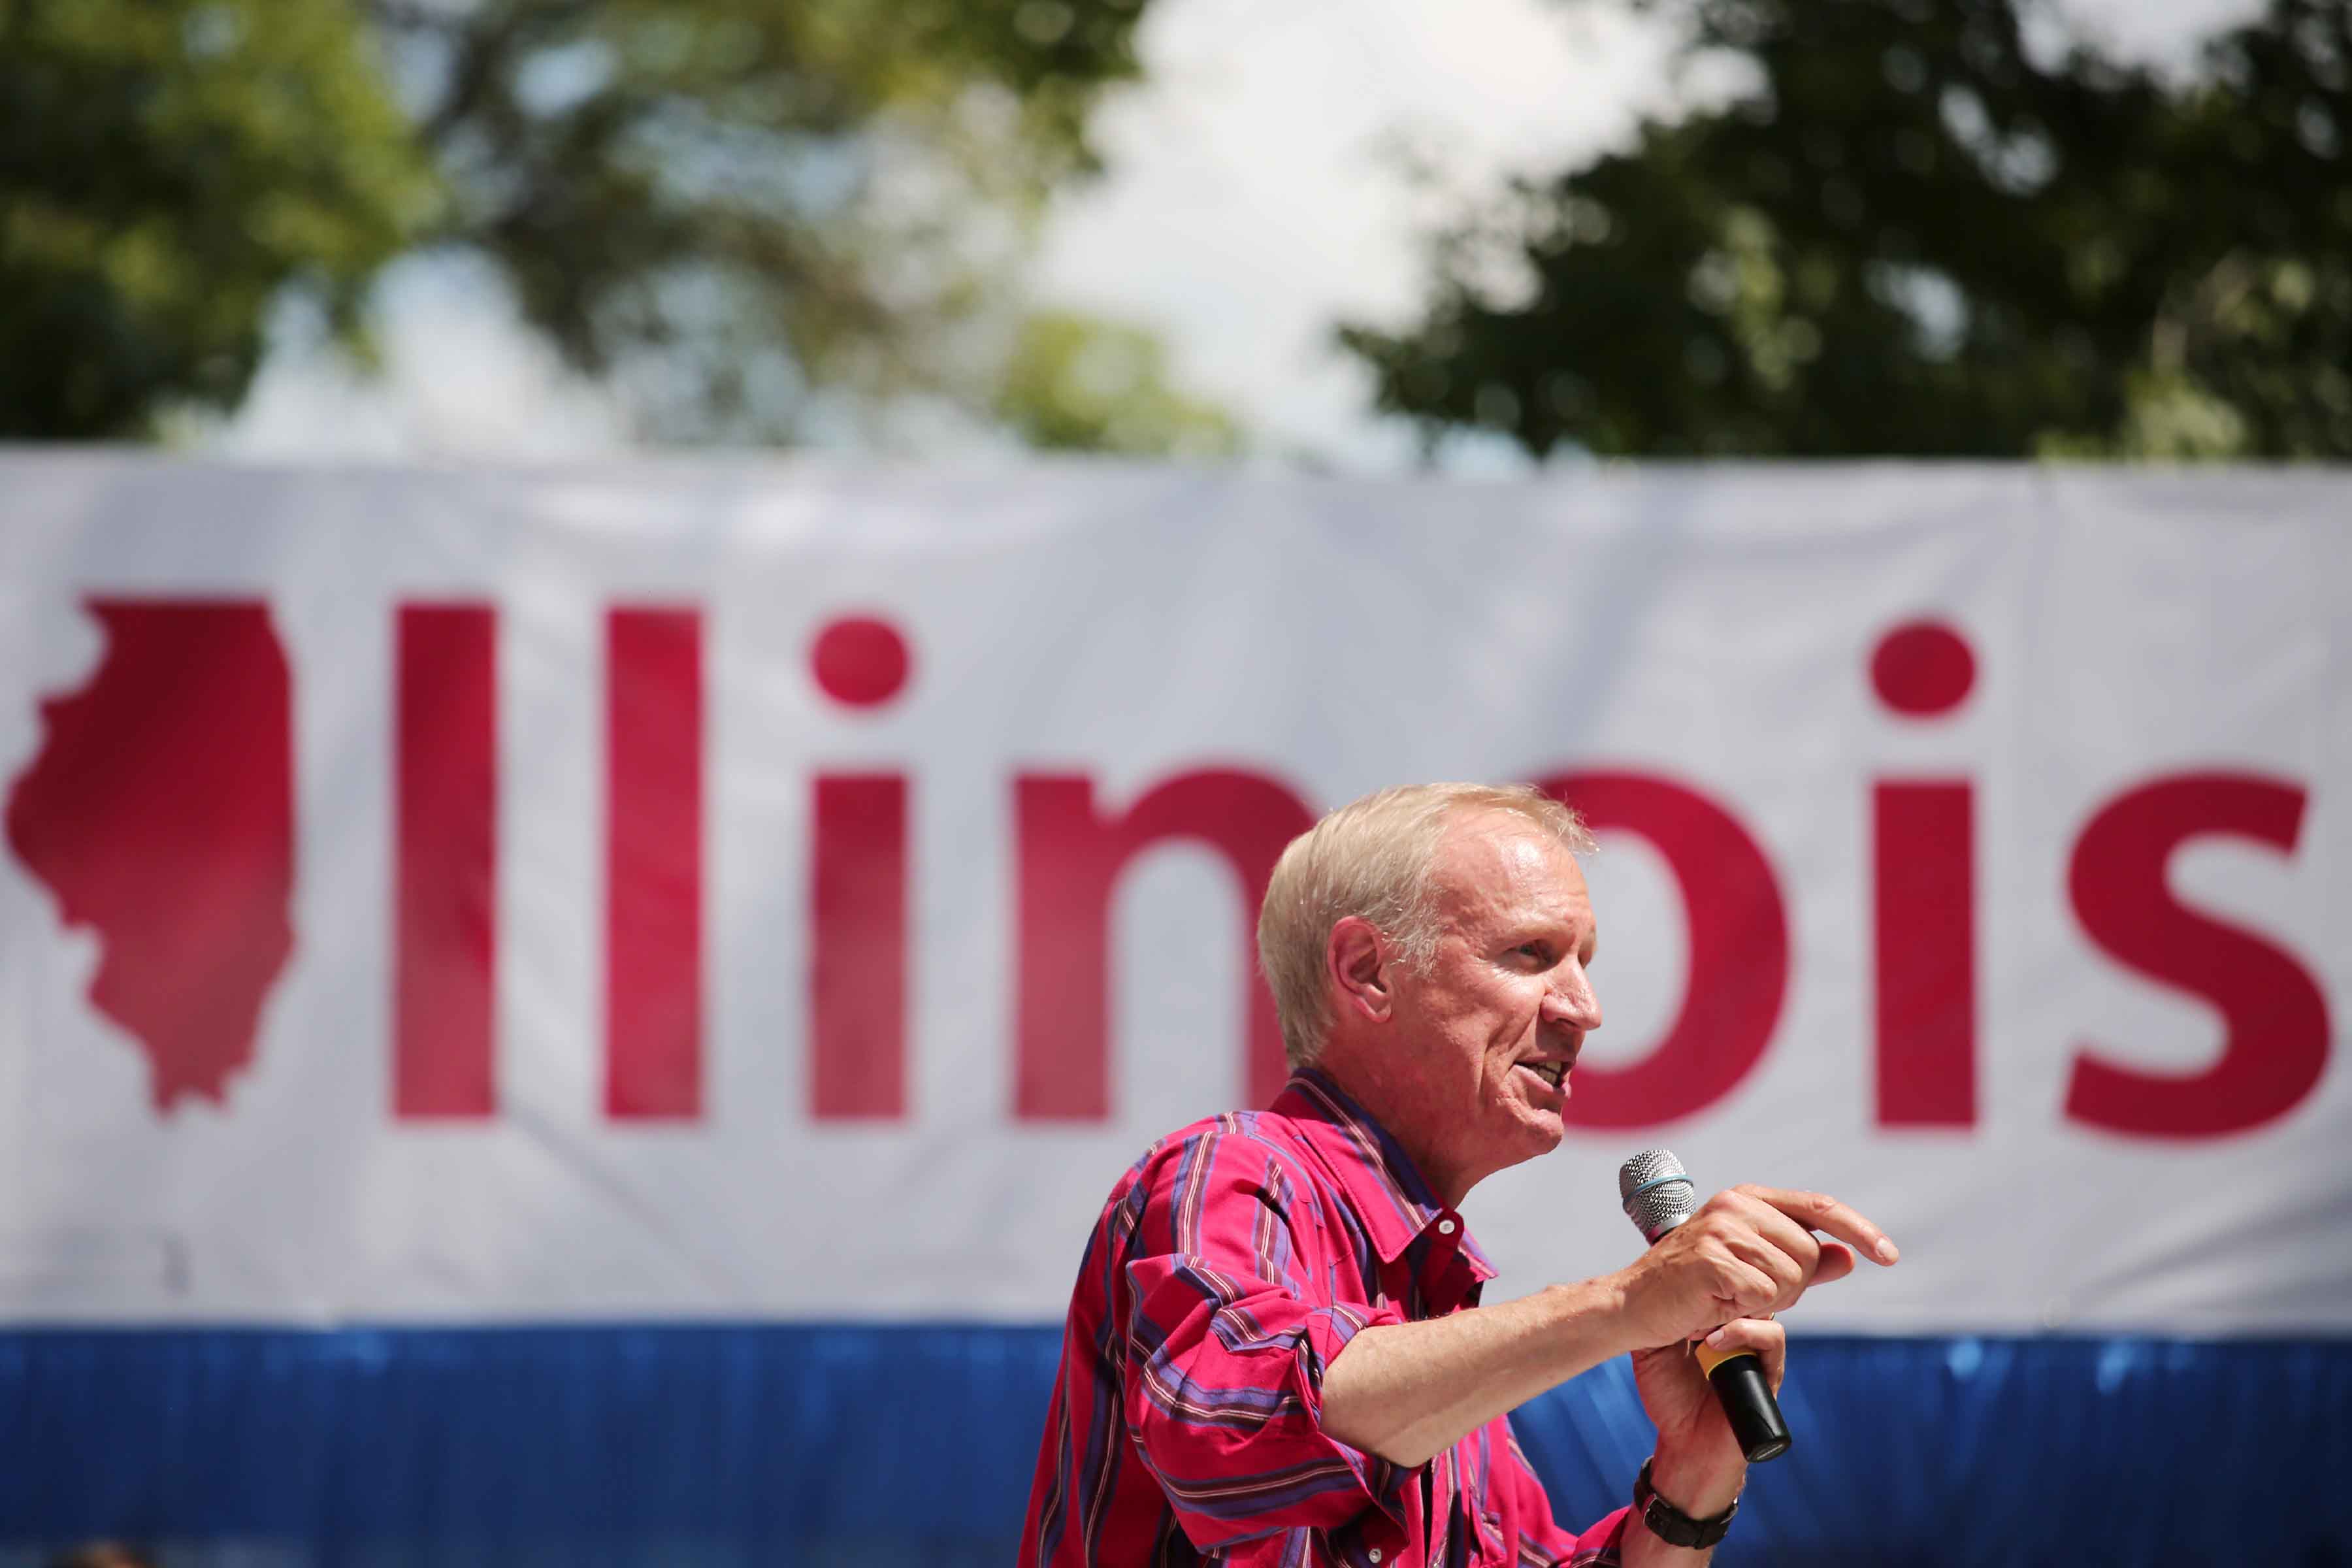 Illinois Gov. Bruce Rauner speaks at the Illinois State Fair on Aug. 17, 2016, in Springfield. (Anthony Souffle/Chicago Tribune/TNS)